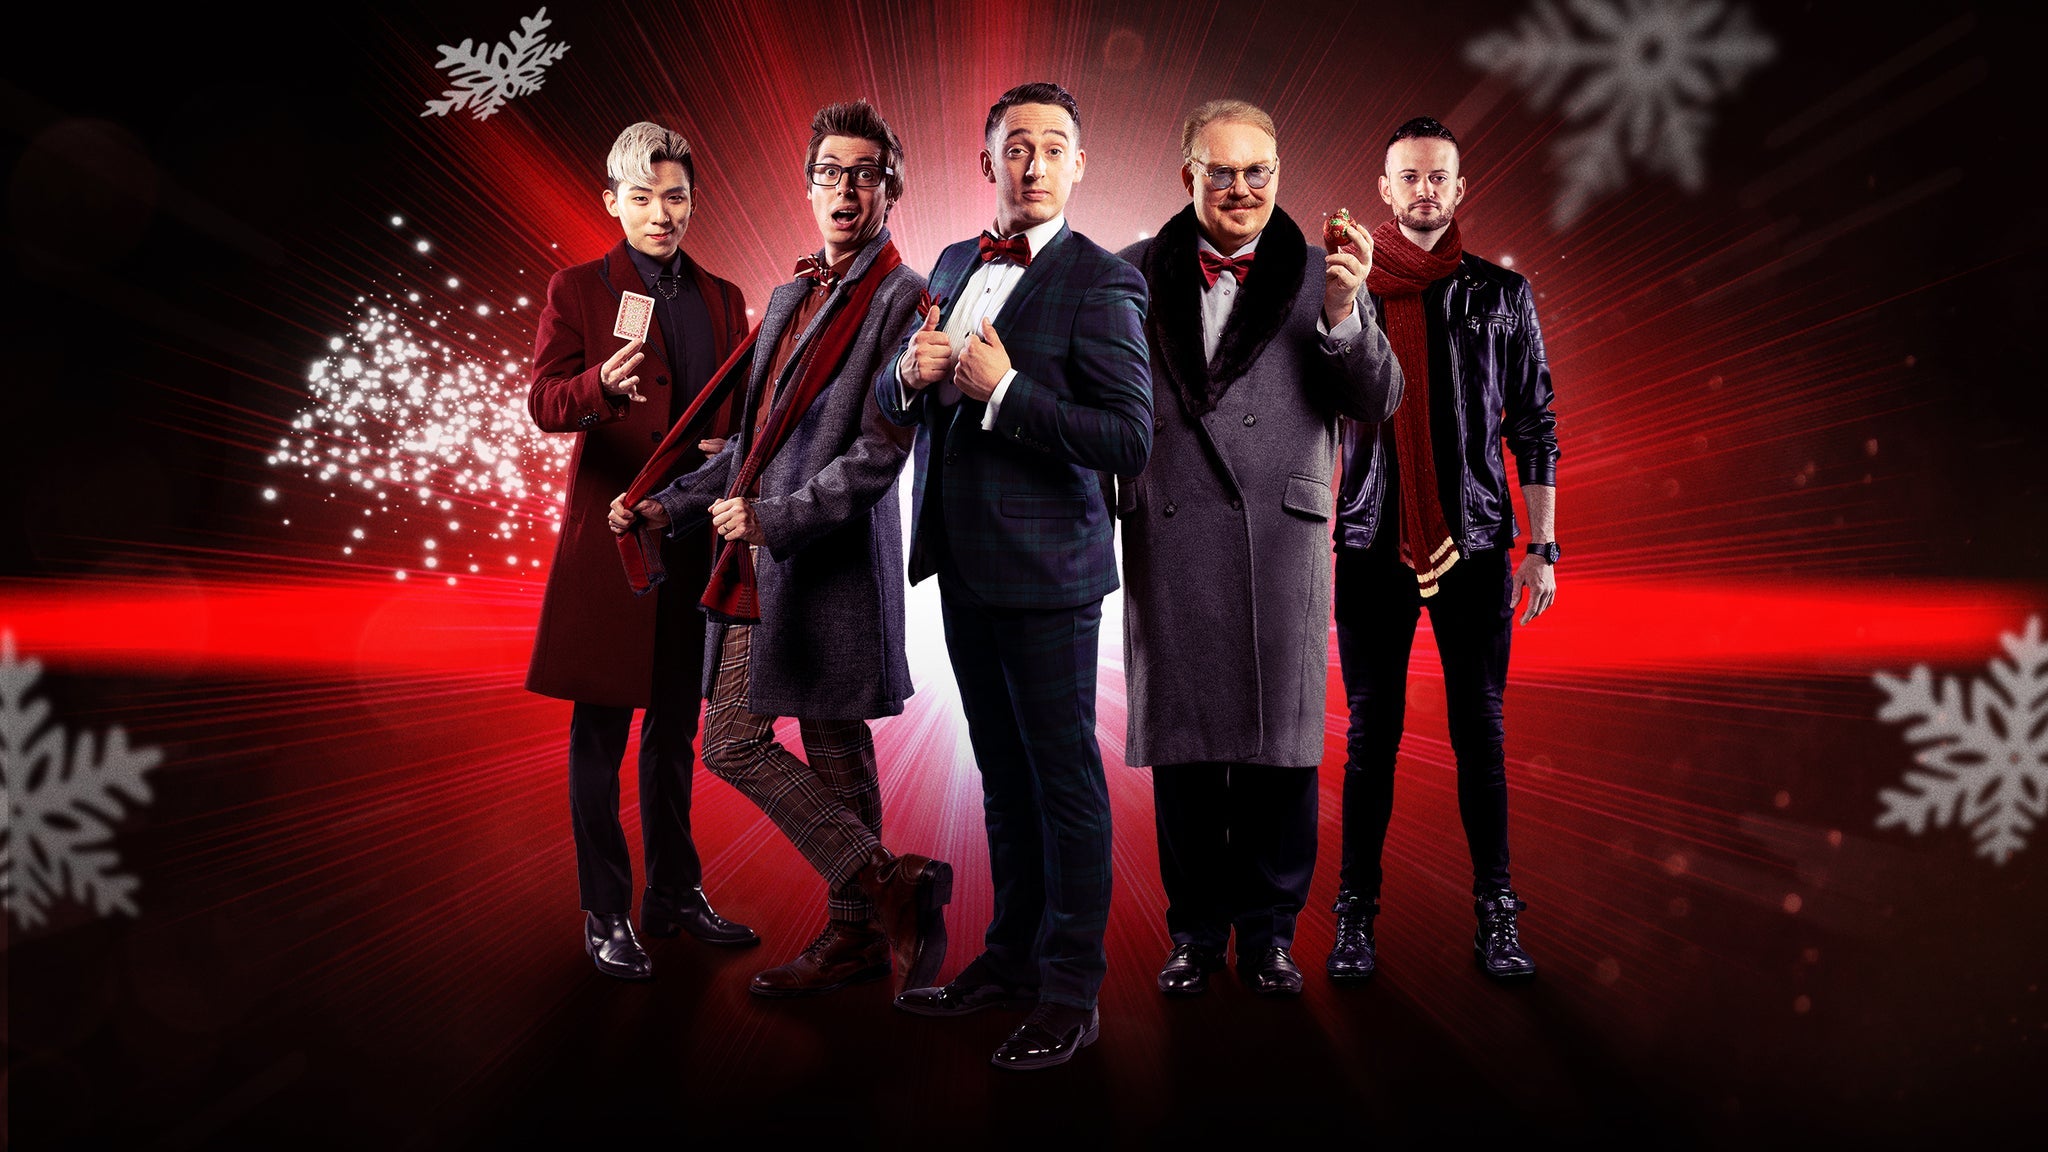 The Illusionists-Magic Of The Holidays presale code for show tickets in Windsor, ON (The Colosseum at Caesars Windsor)